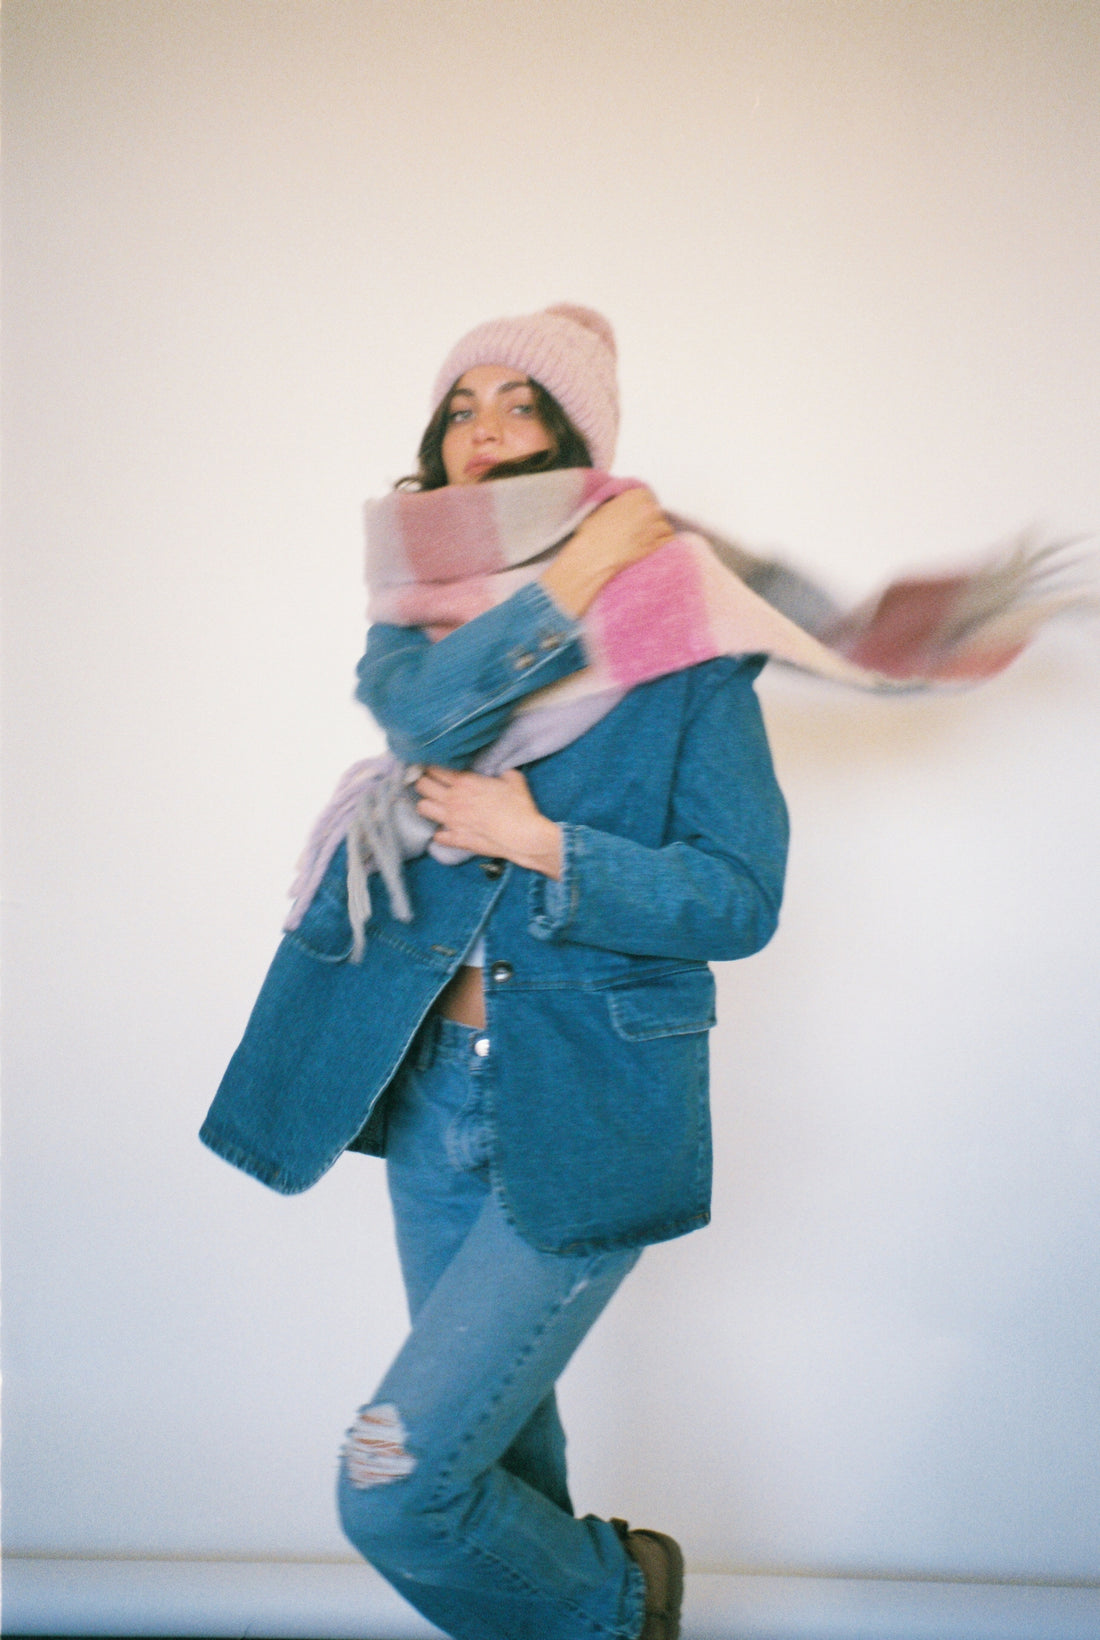 Amsterdam Wrap Scarf In Lavender/Pink